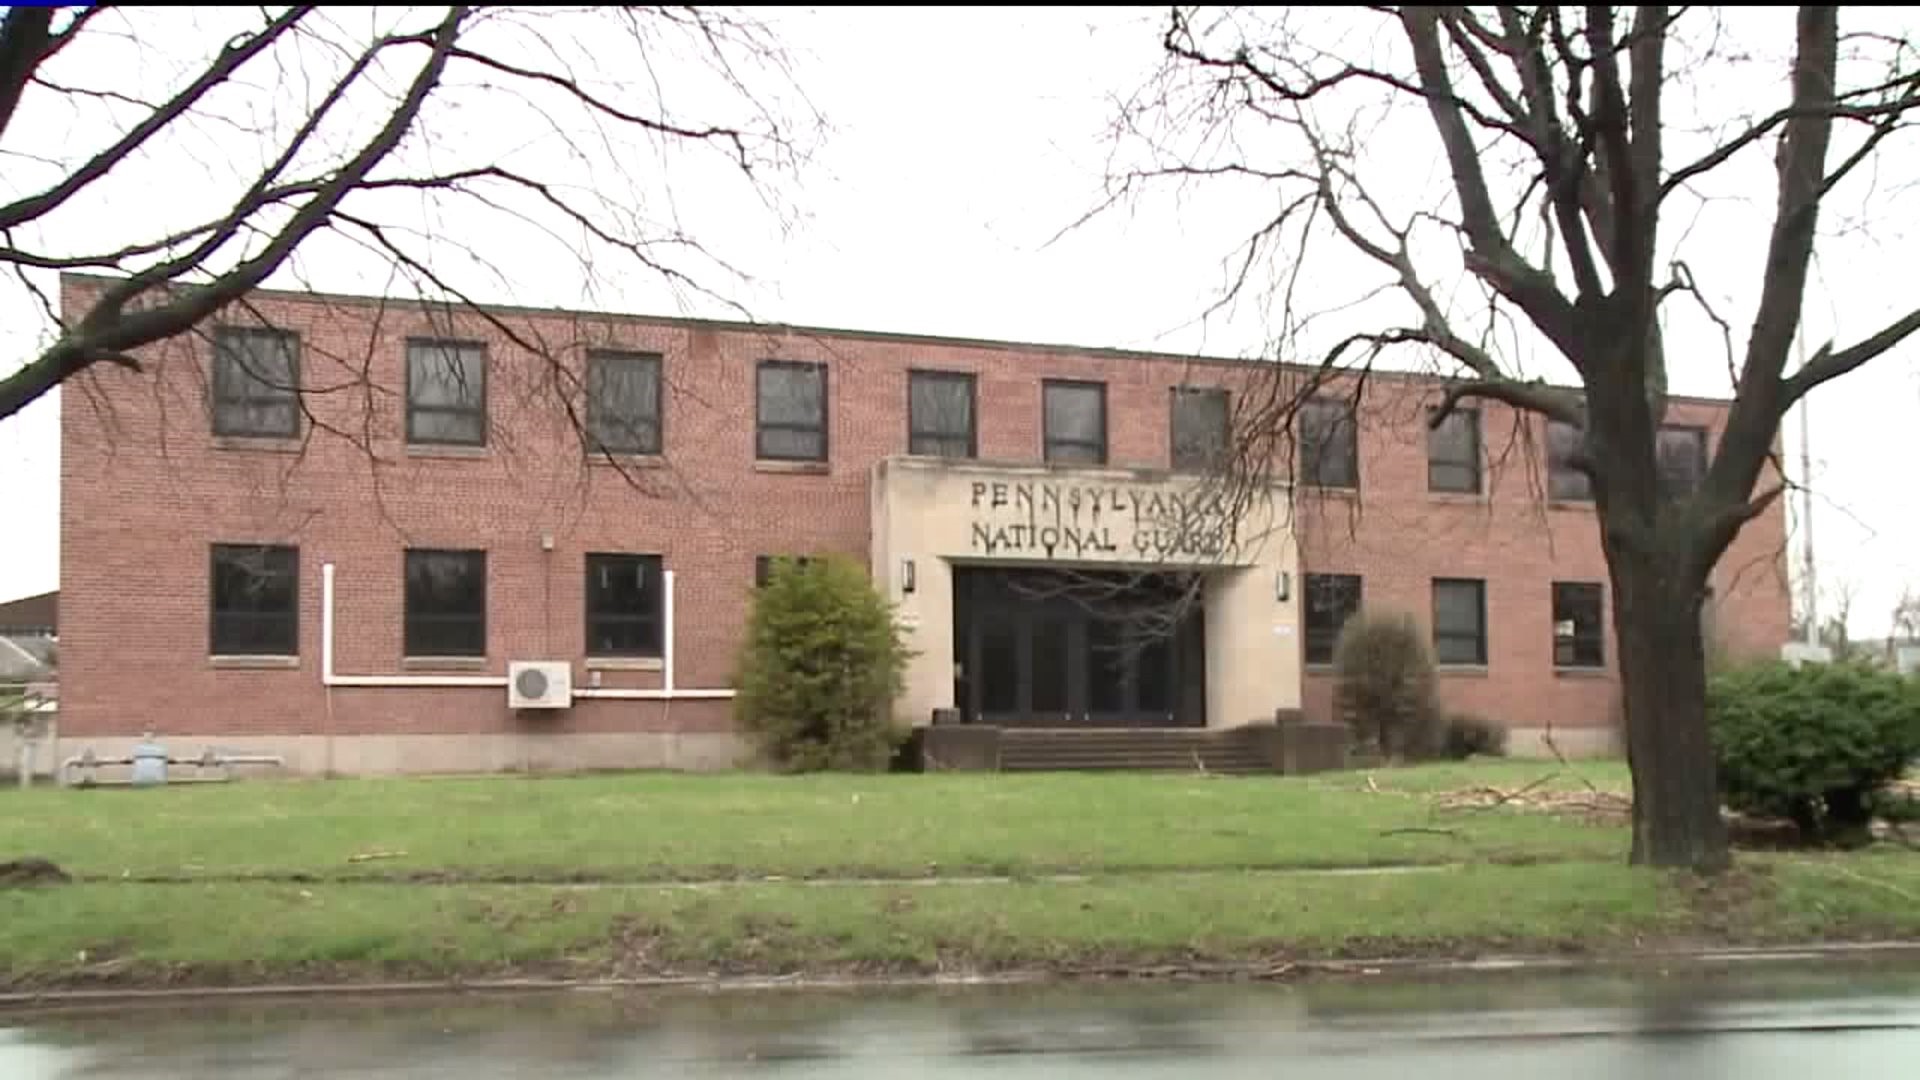 New Life for Empty Armory Building in West Pittston